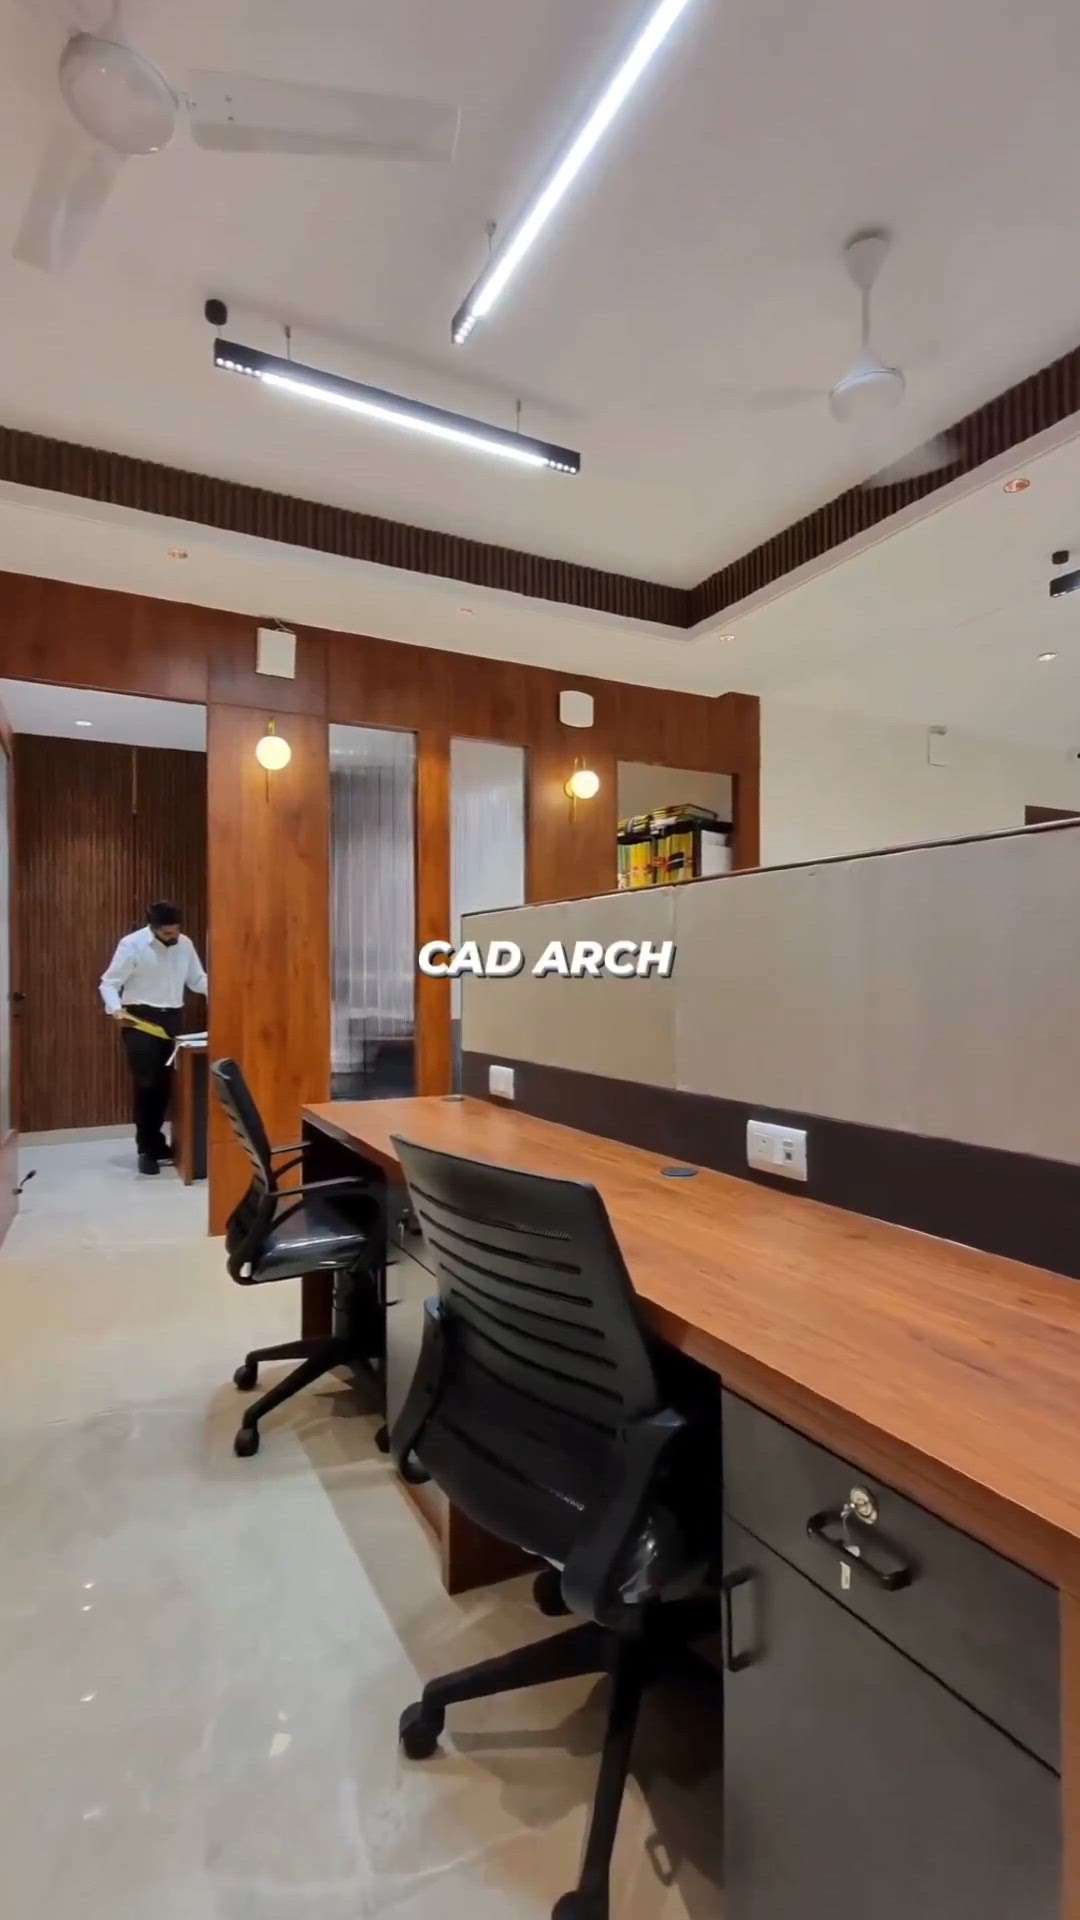 contact me for all kind of furniture we deal in best price in the market ..
#OfficeRoom #officeinteriors #officestyle #InteriorDesigner #Architect #HouseDesigns #LEDCeiling #ModernBedMaking #DiningChairs #fixture #showrooms #showroomsfixture #arvindmil #viralhousedesign #viralreels #kolohindi #koloindial